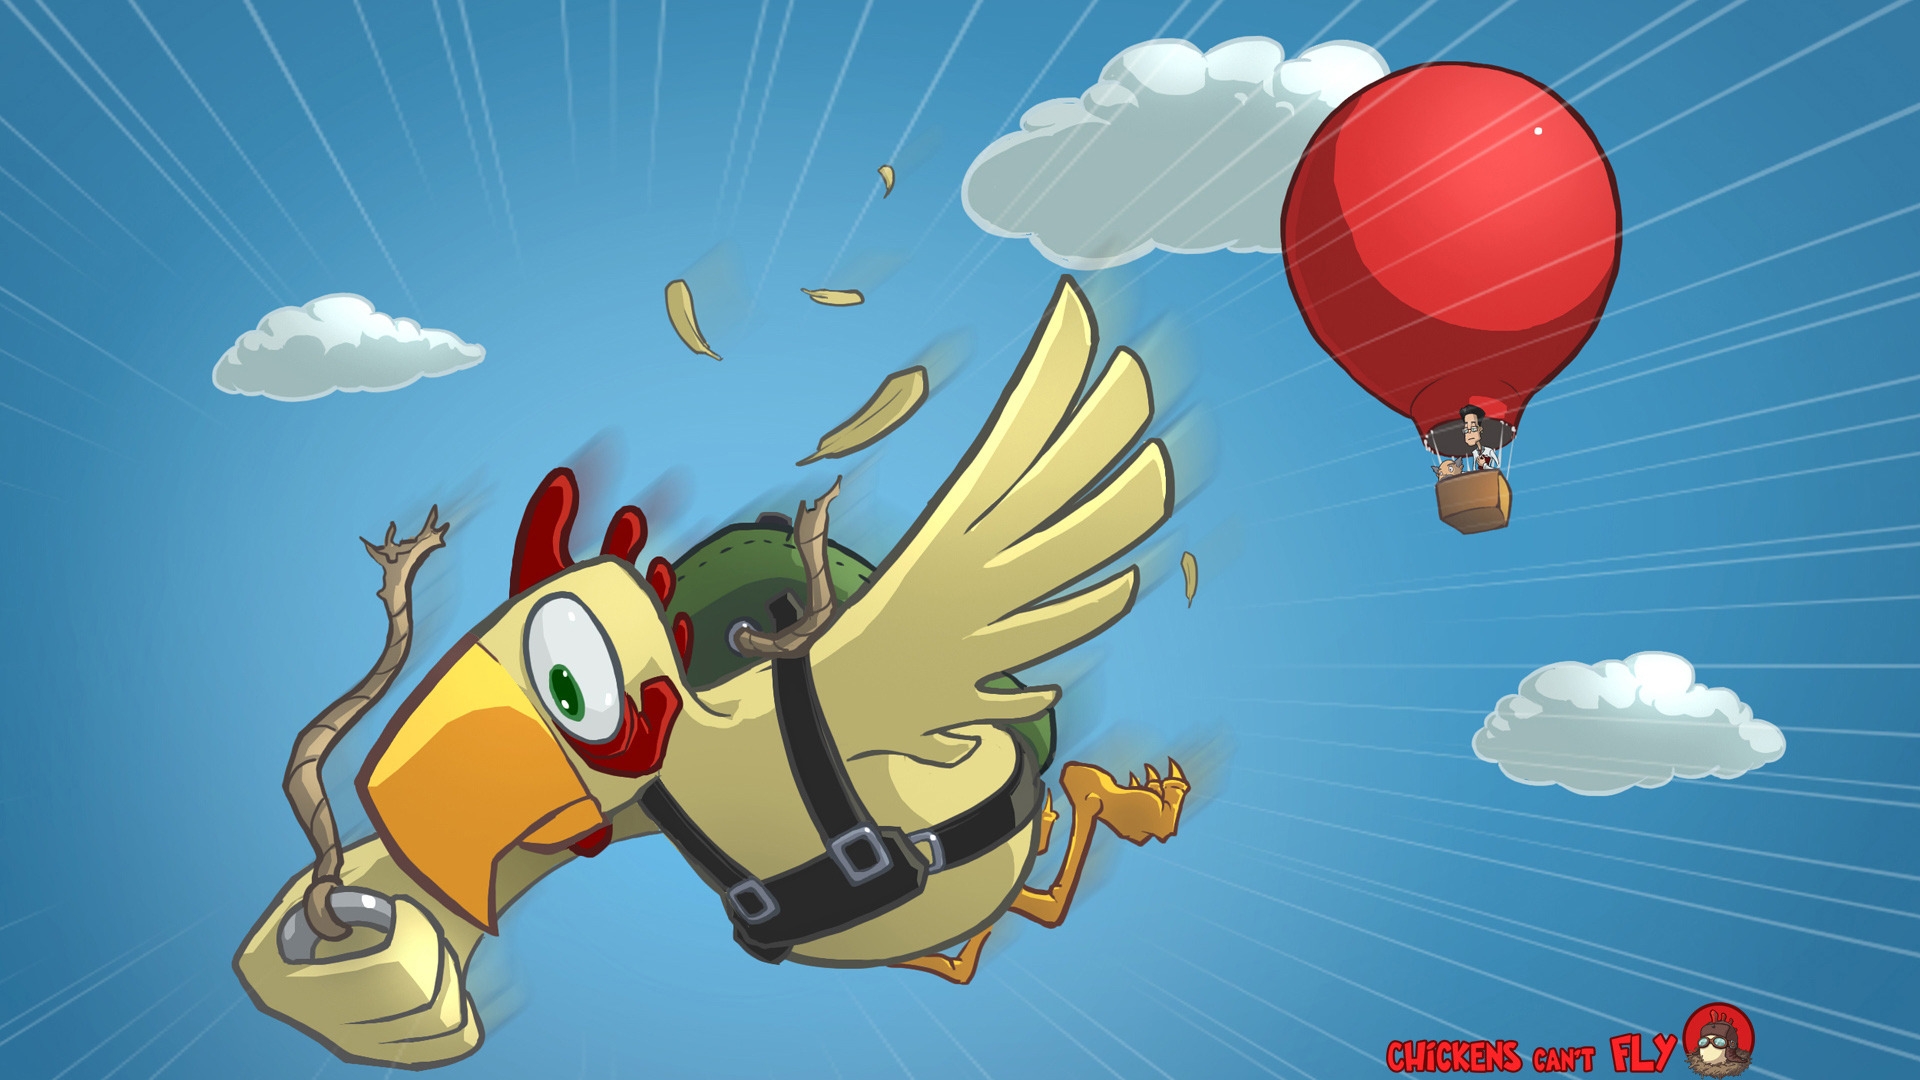 Chickens Cant Fly for 1920 x 1080 HDTV 1080p resolution